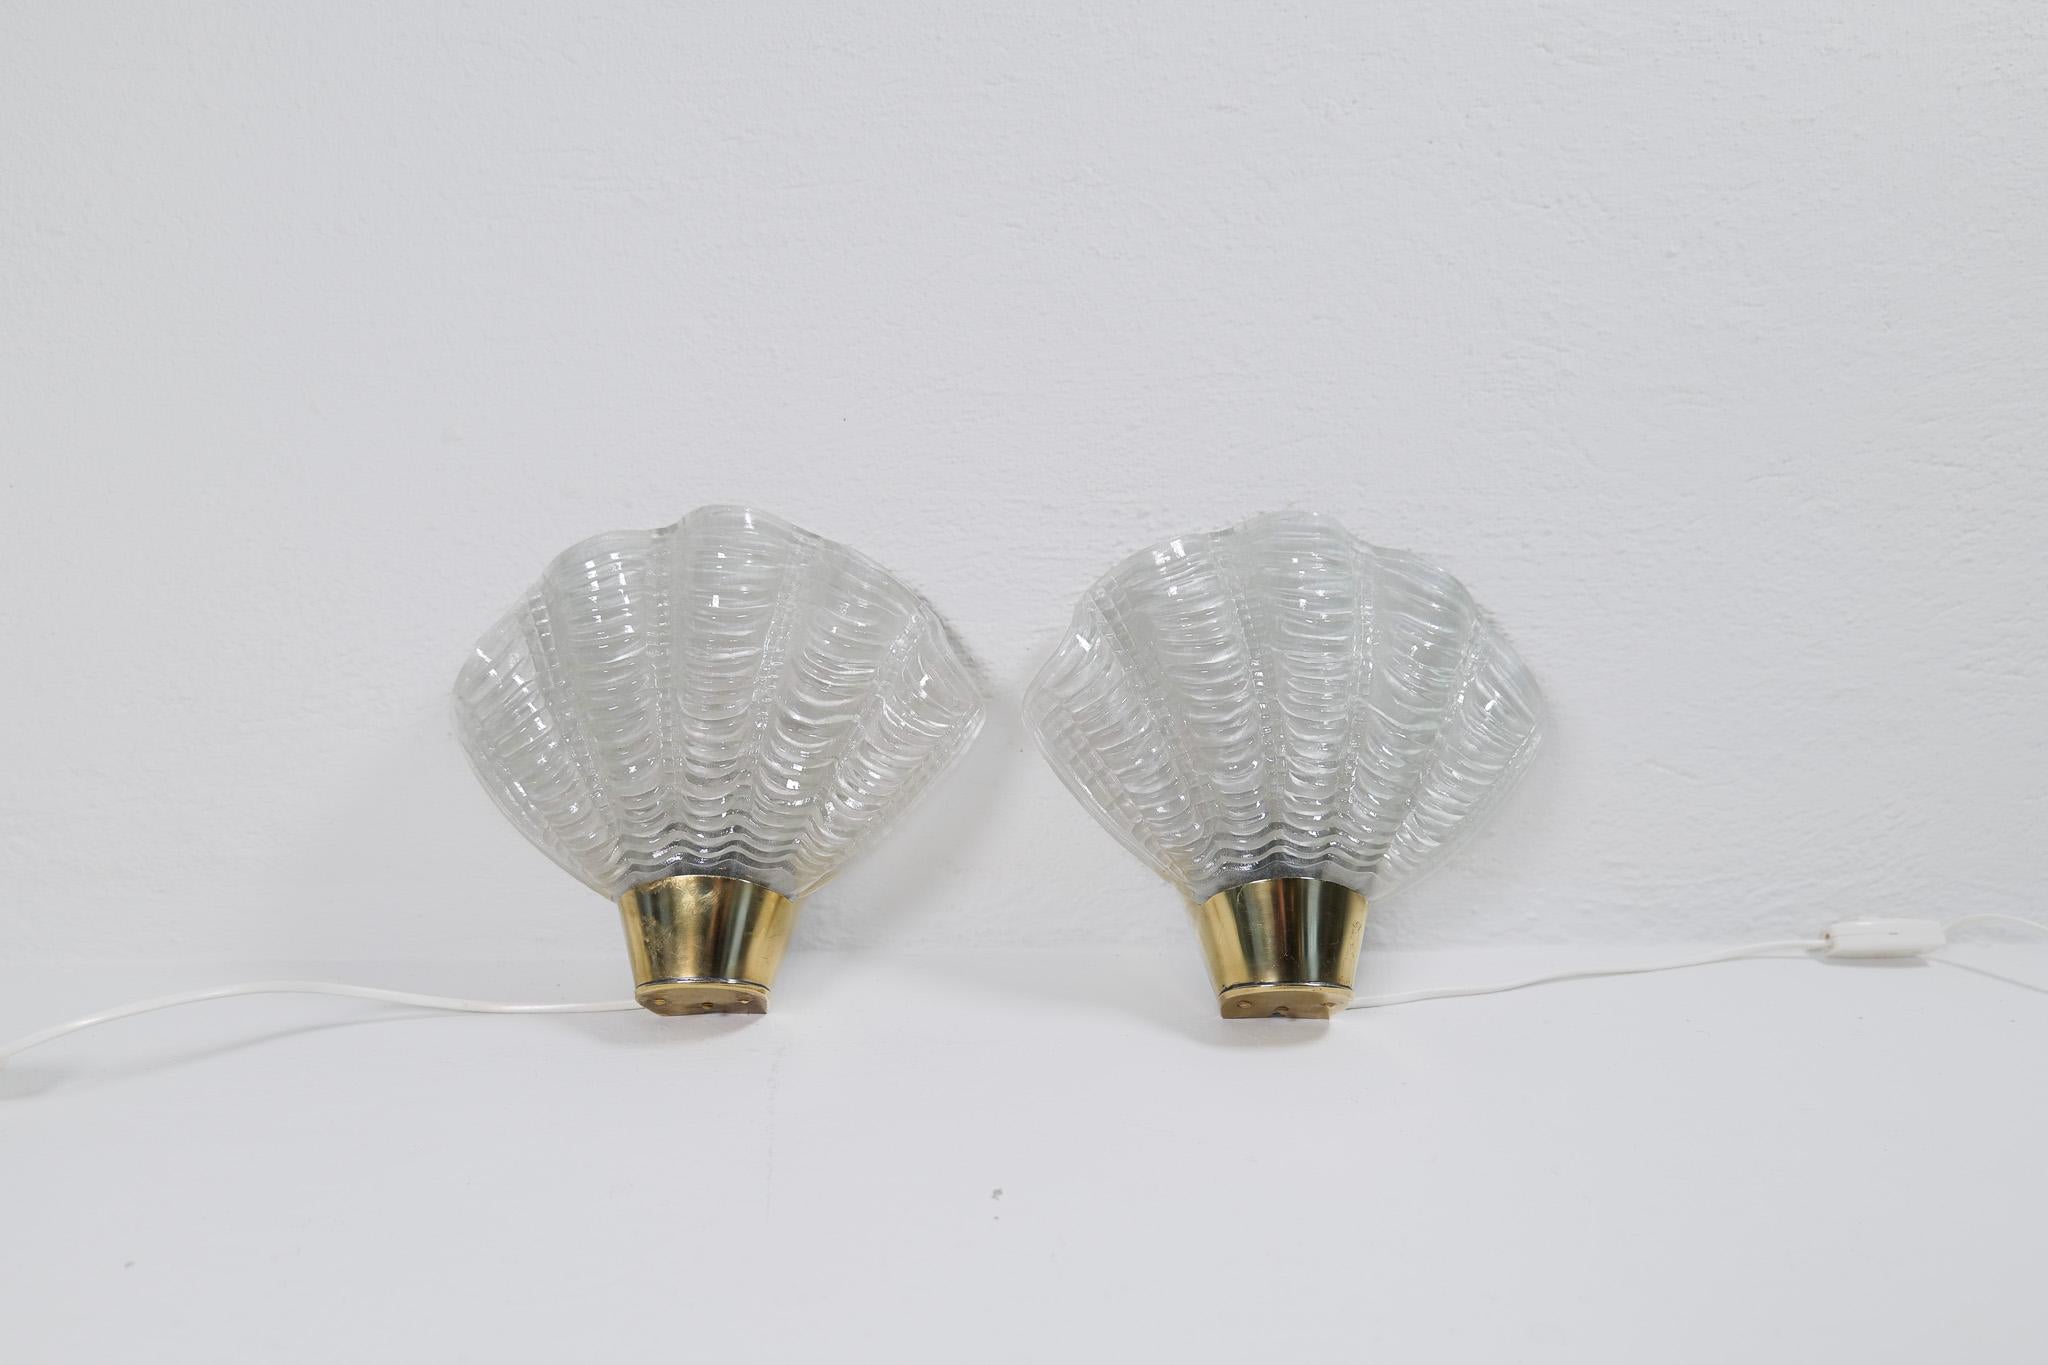 This pair of wall lights in brass and glass were produced by ASEA, Sweden, 1950s. The glass made to look like seashells is great look and with the brass details it’s a stunning icon of a wall lamp. Can be hardwired or plugged in.

Good vintage